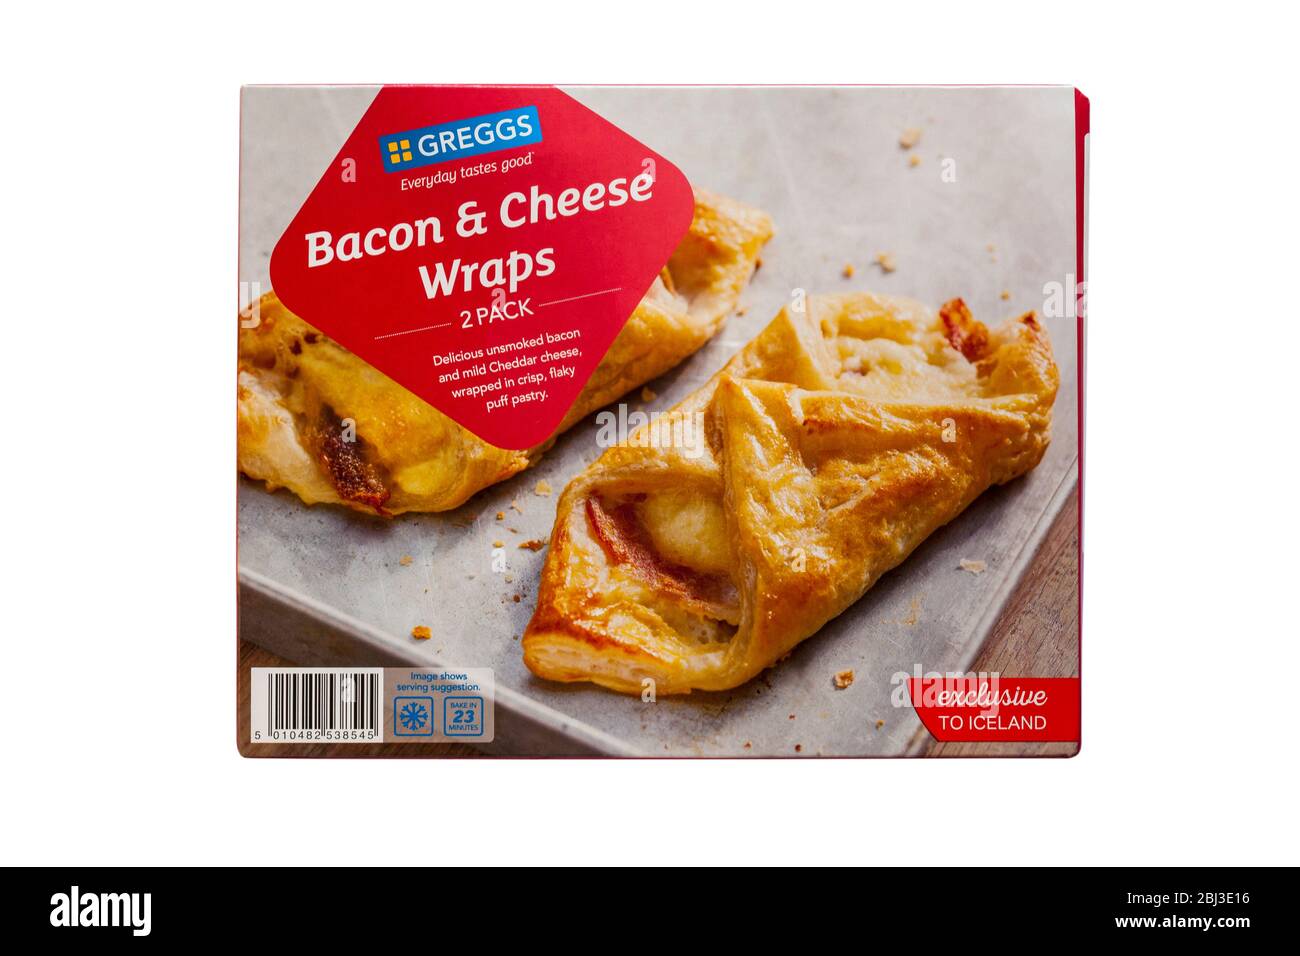 Box of Greggs Bacon and Cheese Wraps exclusive to Iceland isolated on white background Stock Photo